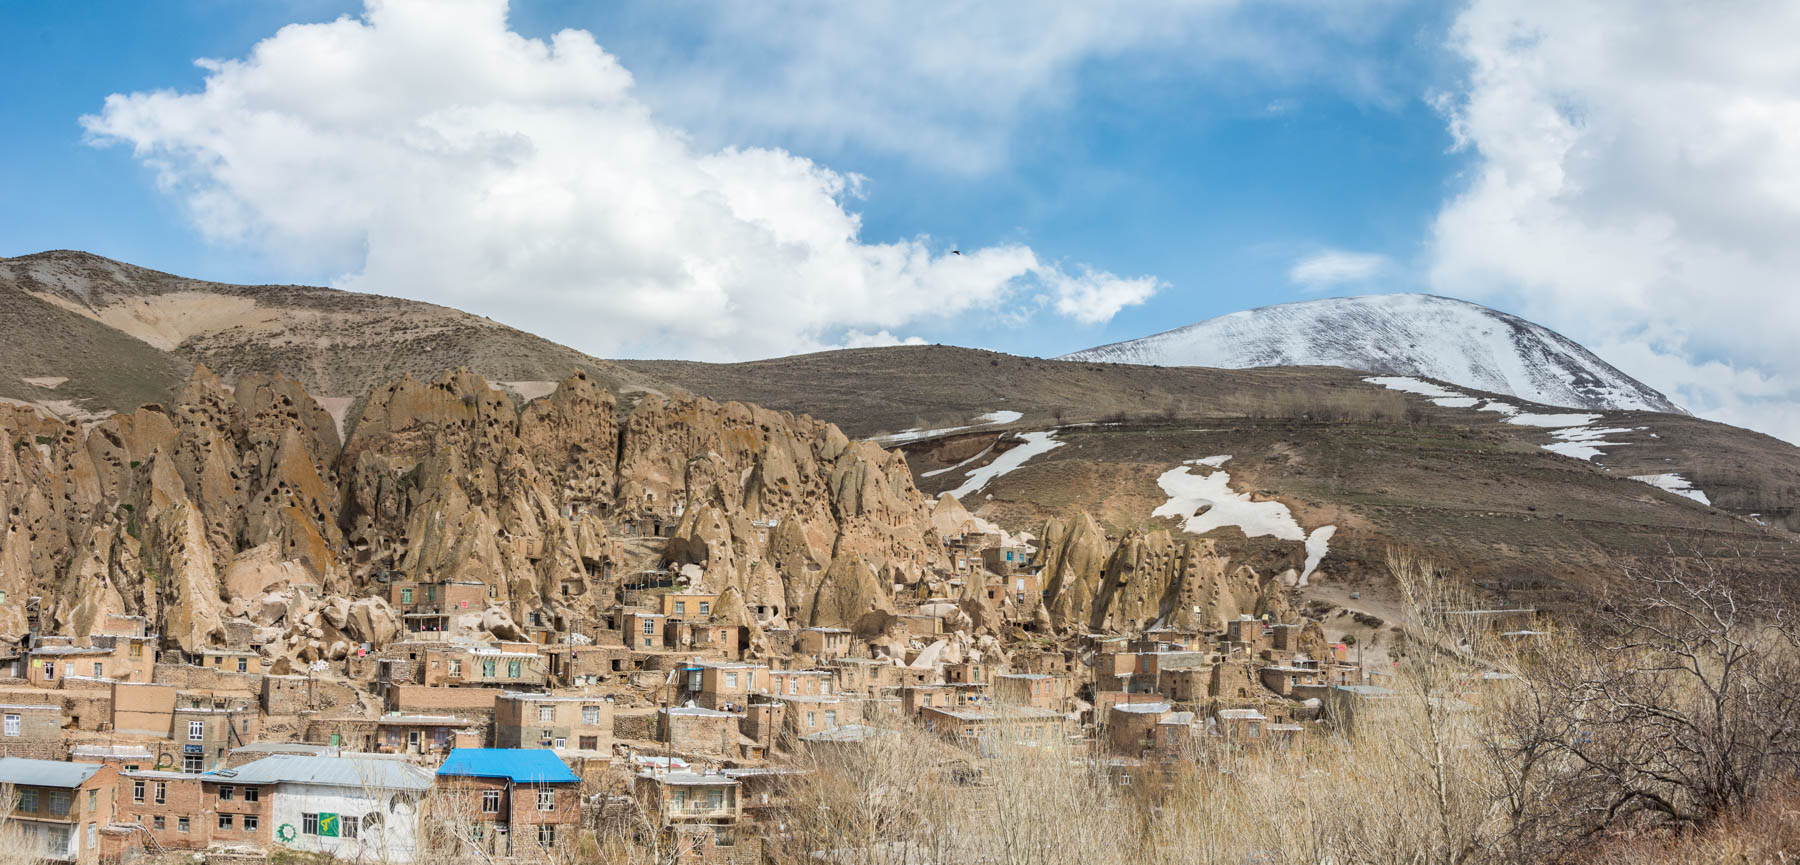 Two week Iran travel itinerary - The cave city of Kandovan, Iran near Tabriz - Lost With Purpose